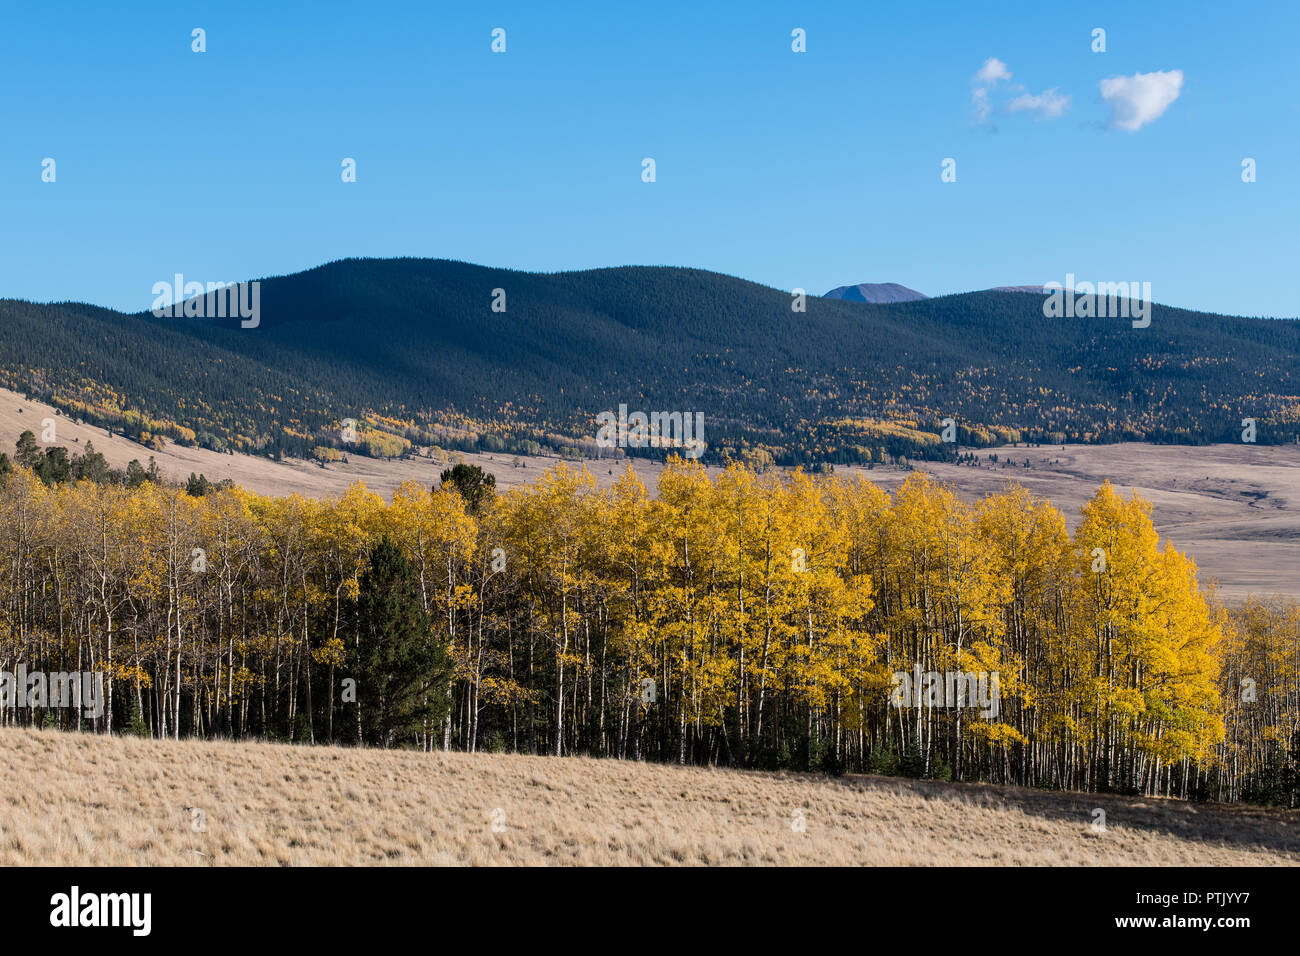 Autumn scene of a golden yellow aspen grove along the edge of a grassy meadow with distant open rangeland and mountains Stock Photo